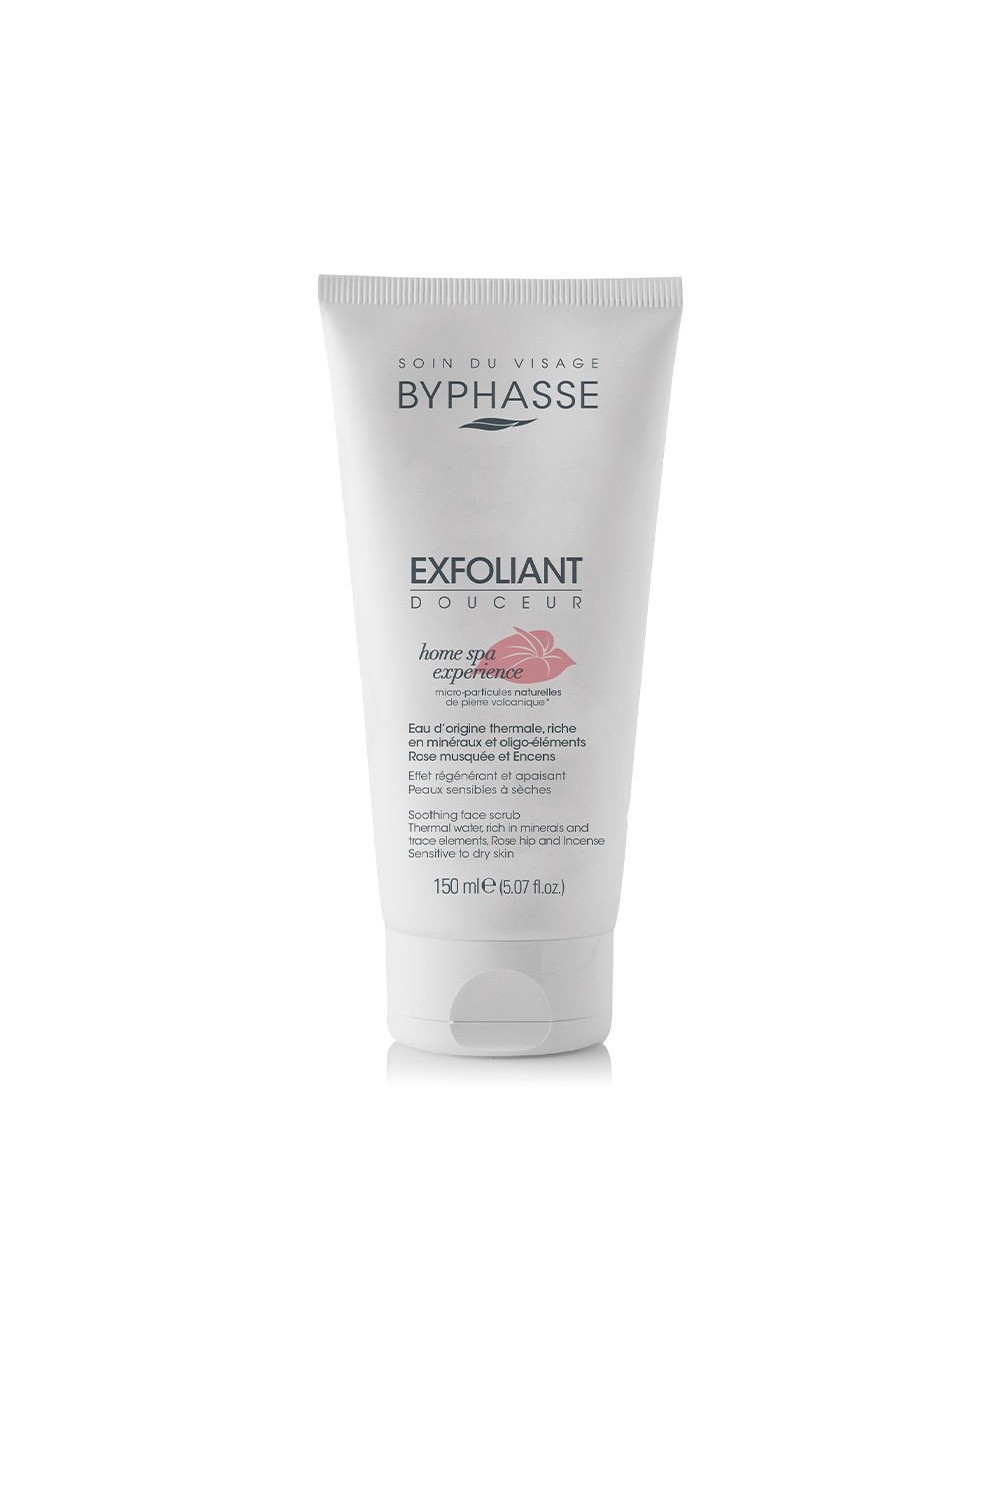 Byphasse Home Spa Experience Exfoliante Facial Douceur 150ml